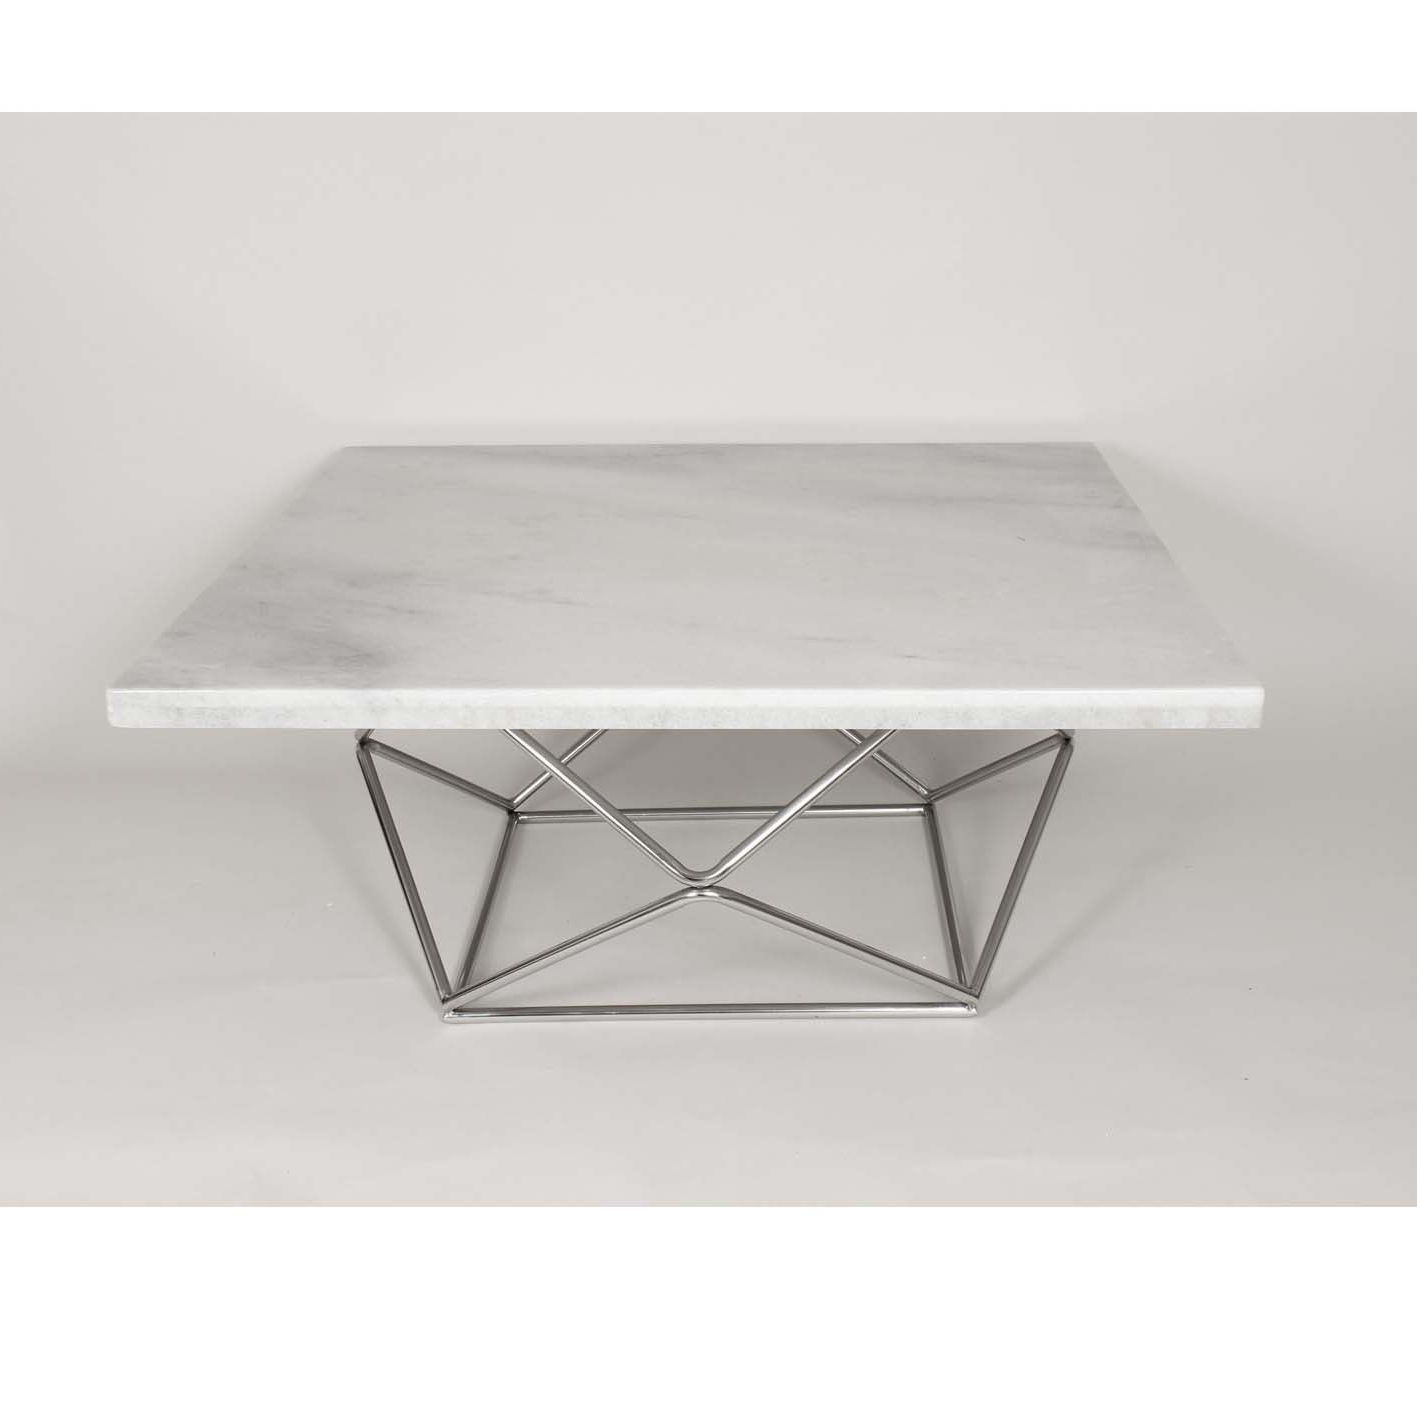 Geometric Coffee Table Pertaining To 2019 White Geometric Coffee Tables (View 3 of 20)